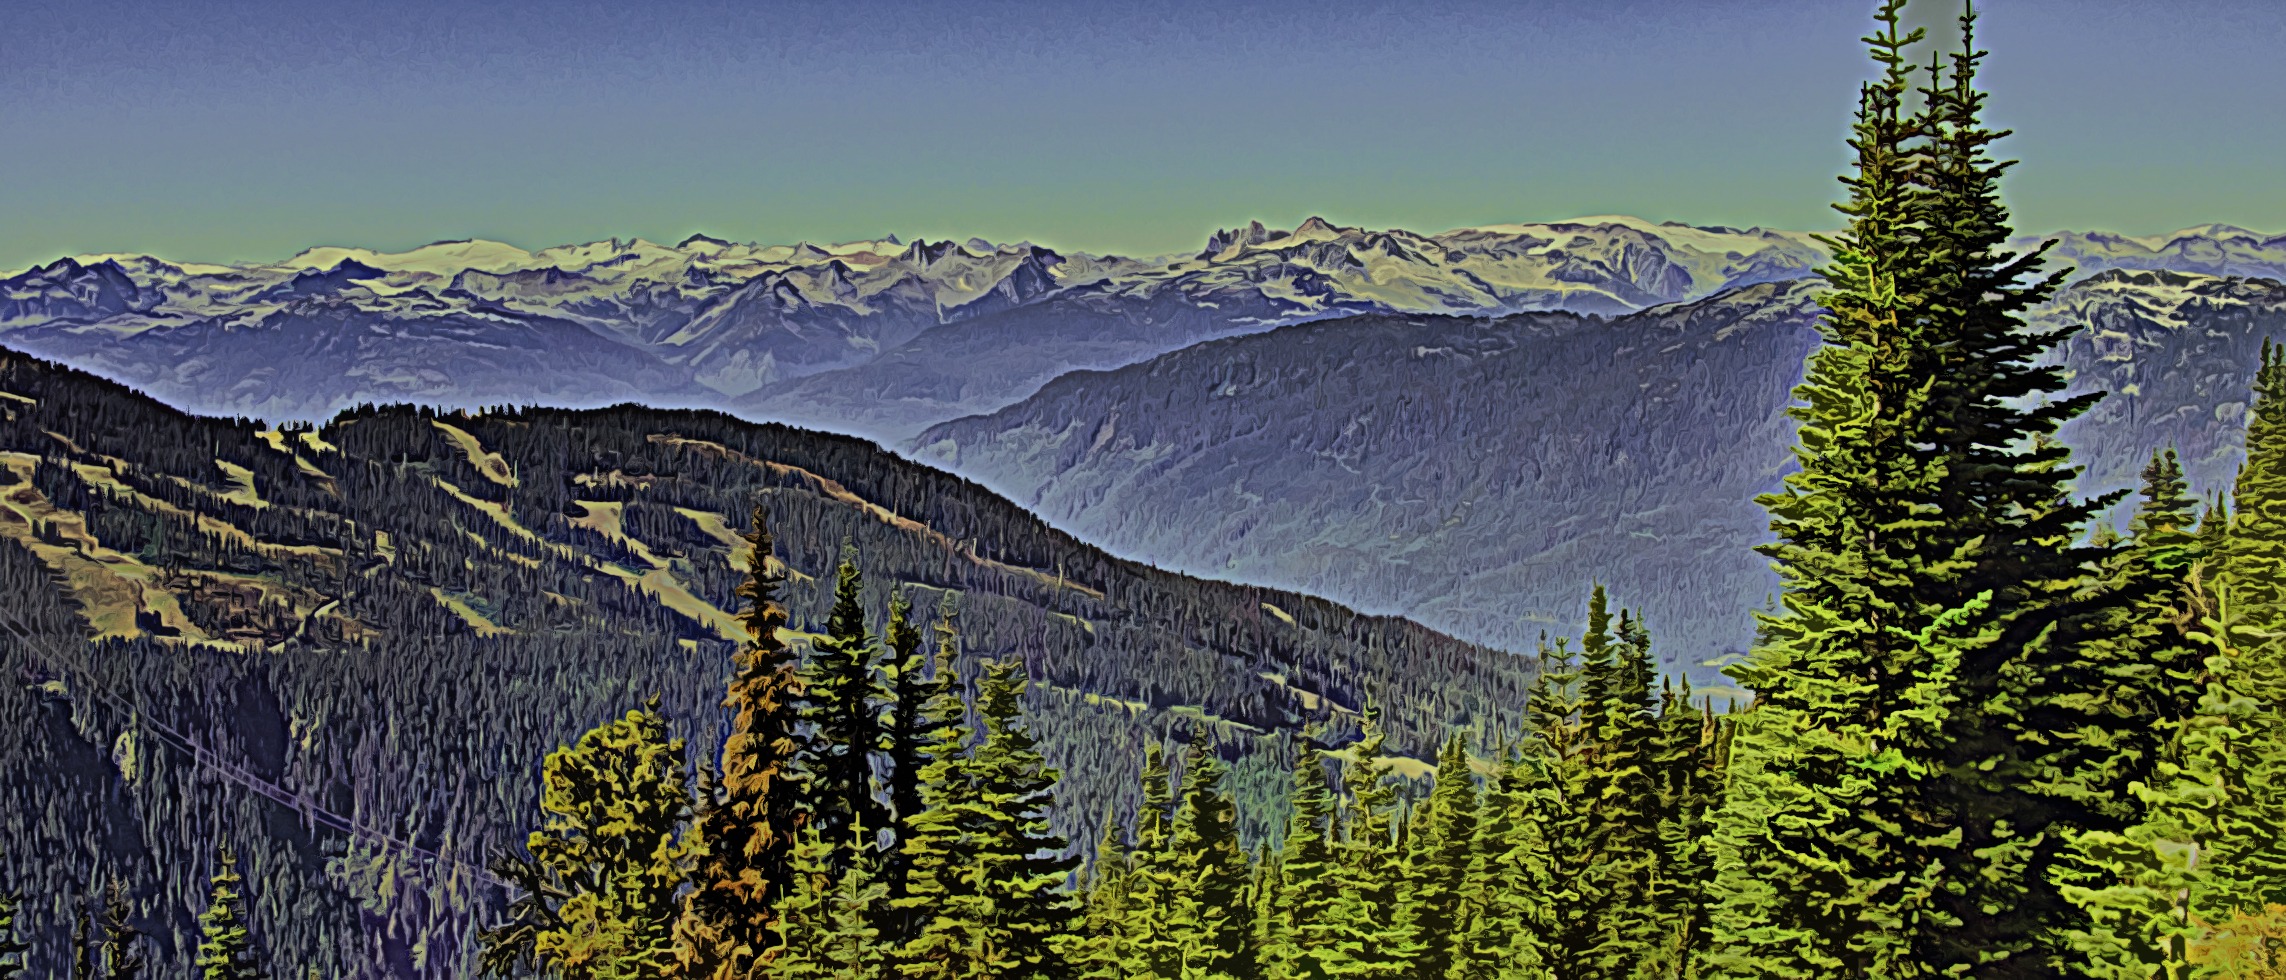 View of nearby mountains from Blackcomb Mountain in Whistler, BC